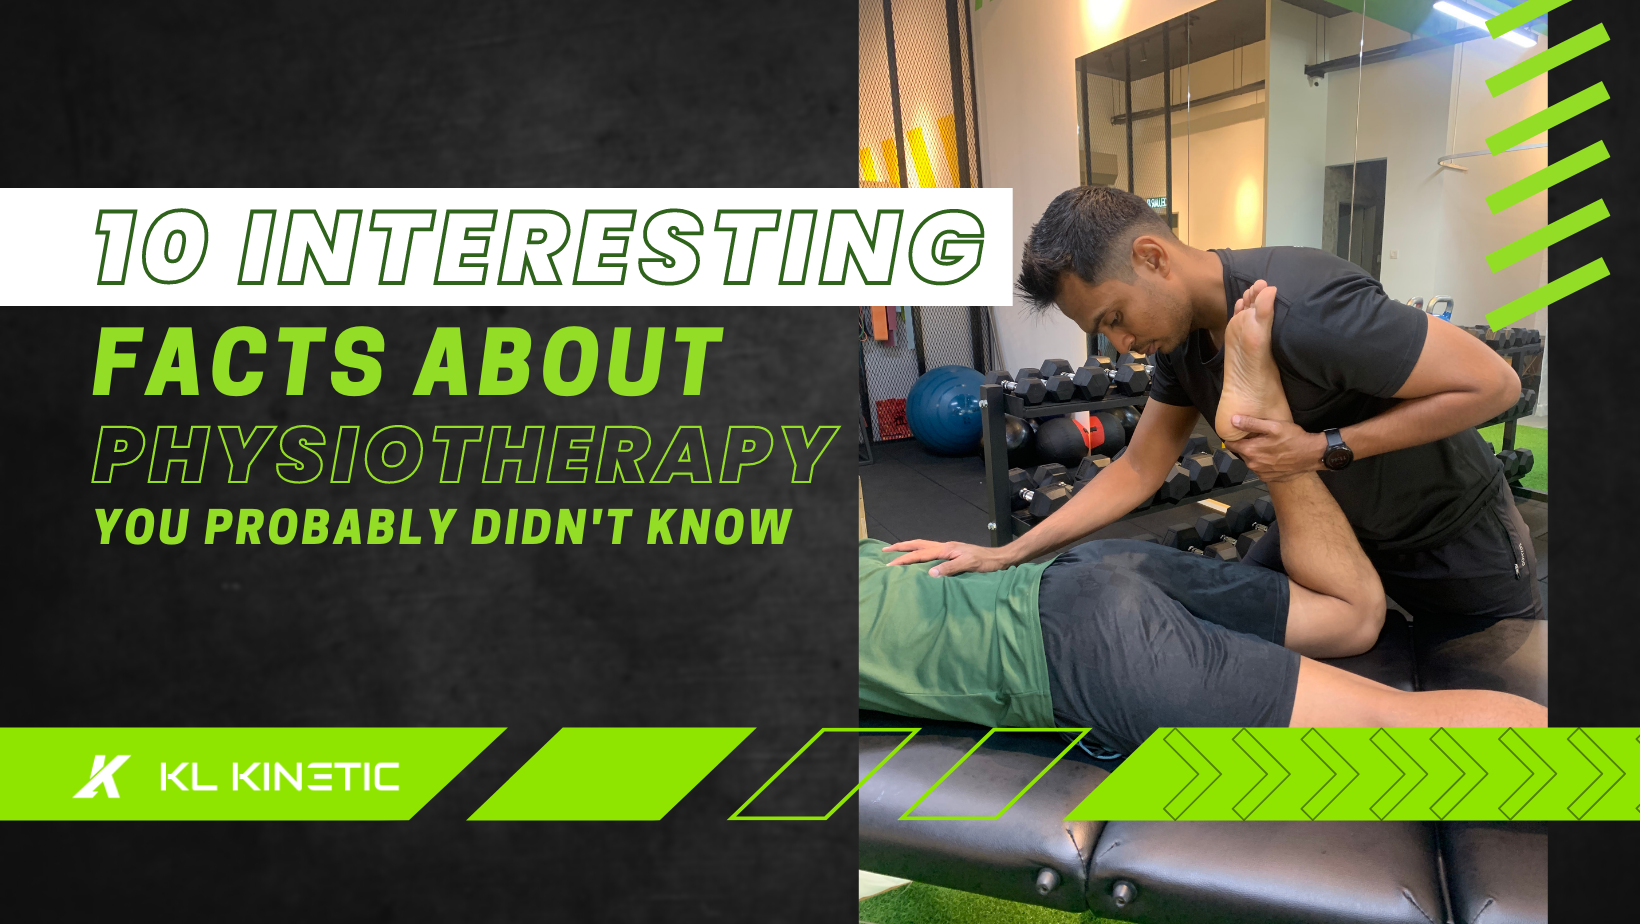 10 Interesting Facts About Physiotherapy You Probably Didn't Know